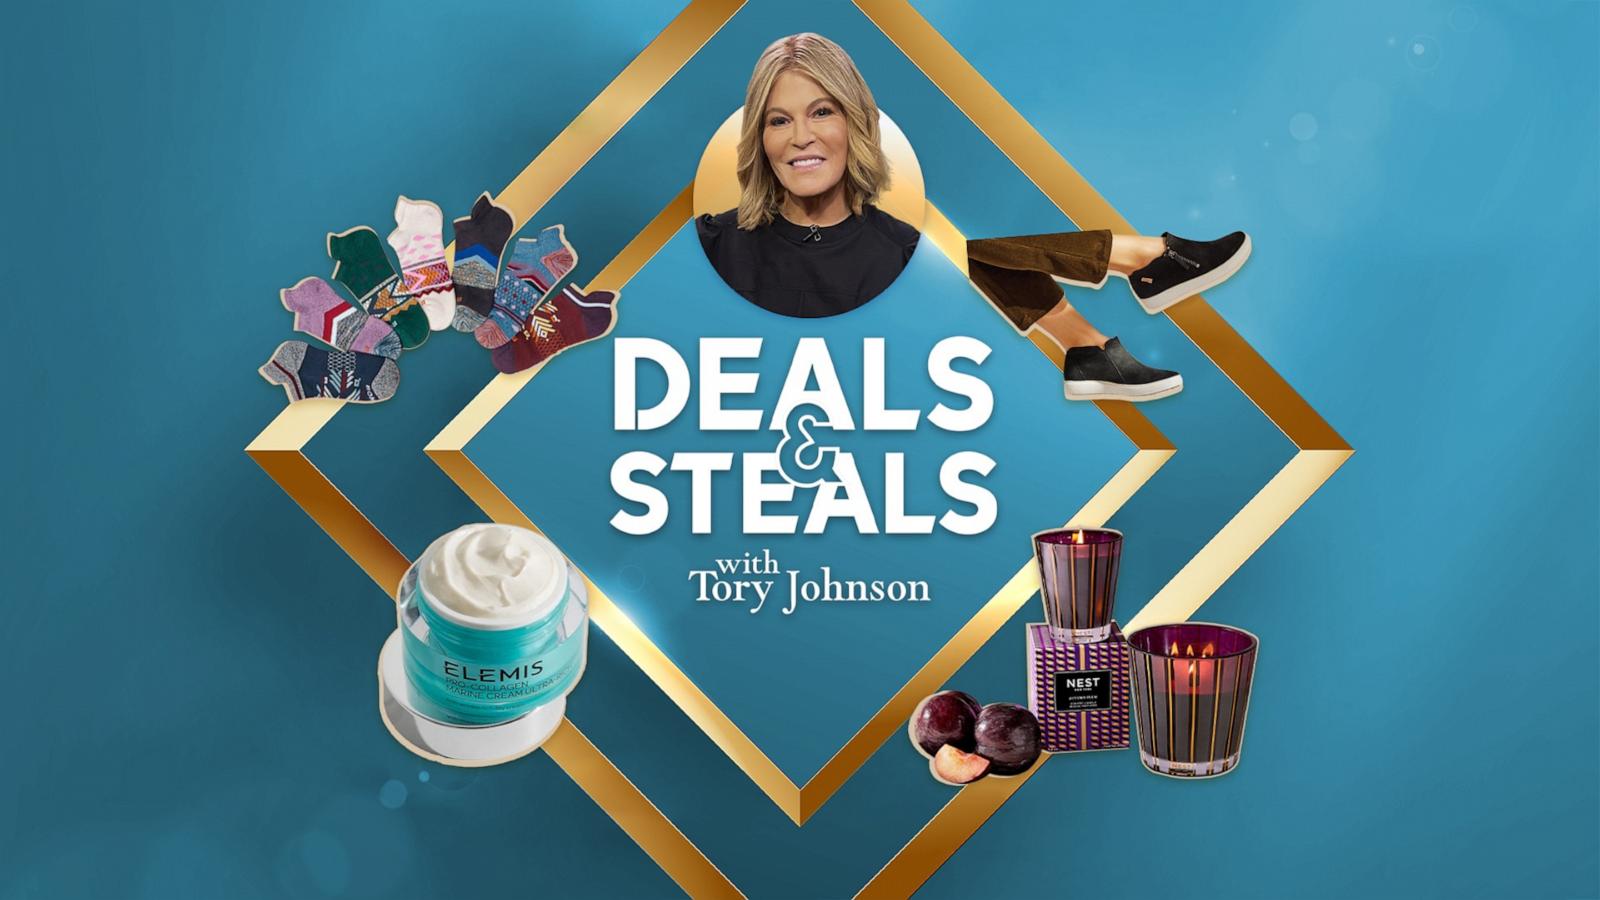 GMA' Deals & Steals on gifts galore - Good Morning America